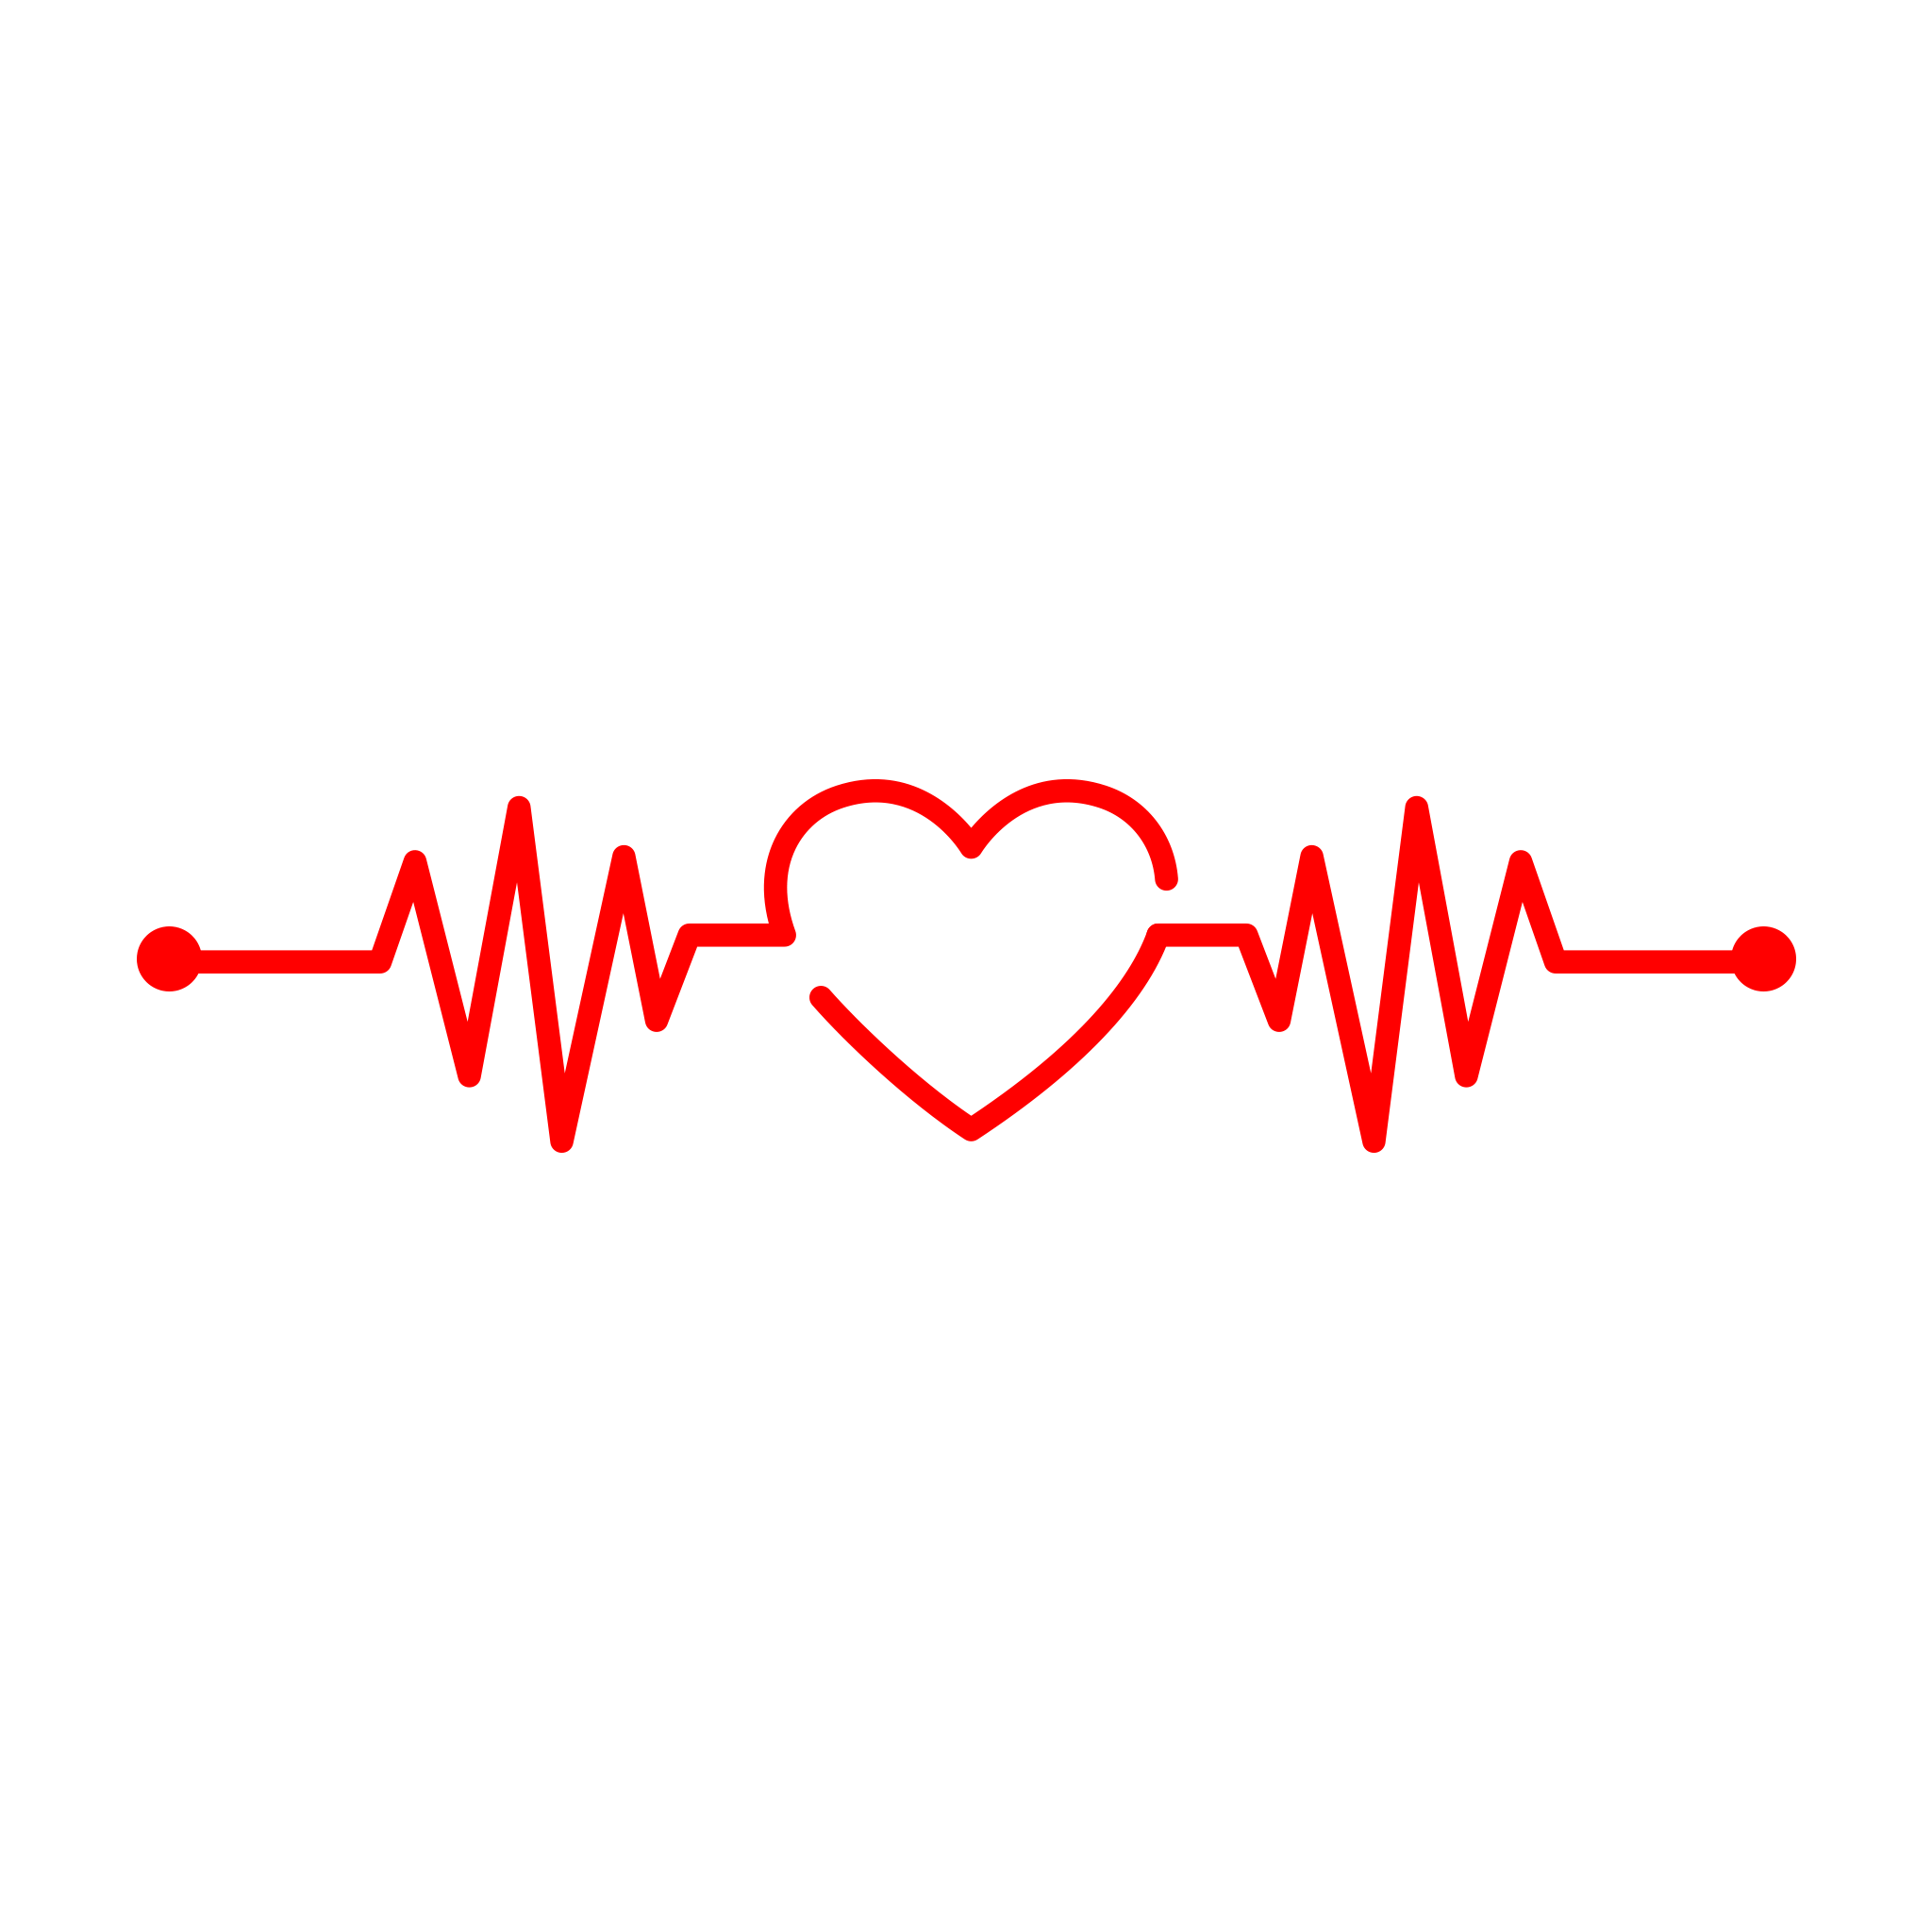 Heartbeat Graph PNG Free Download